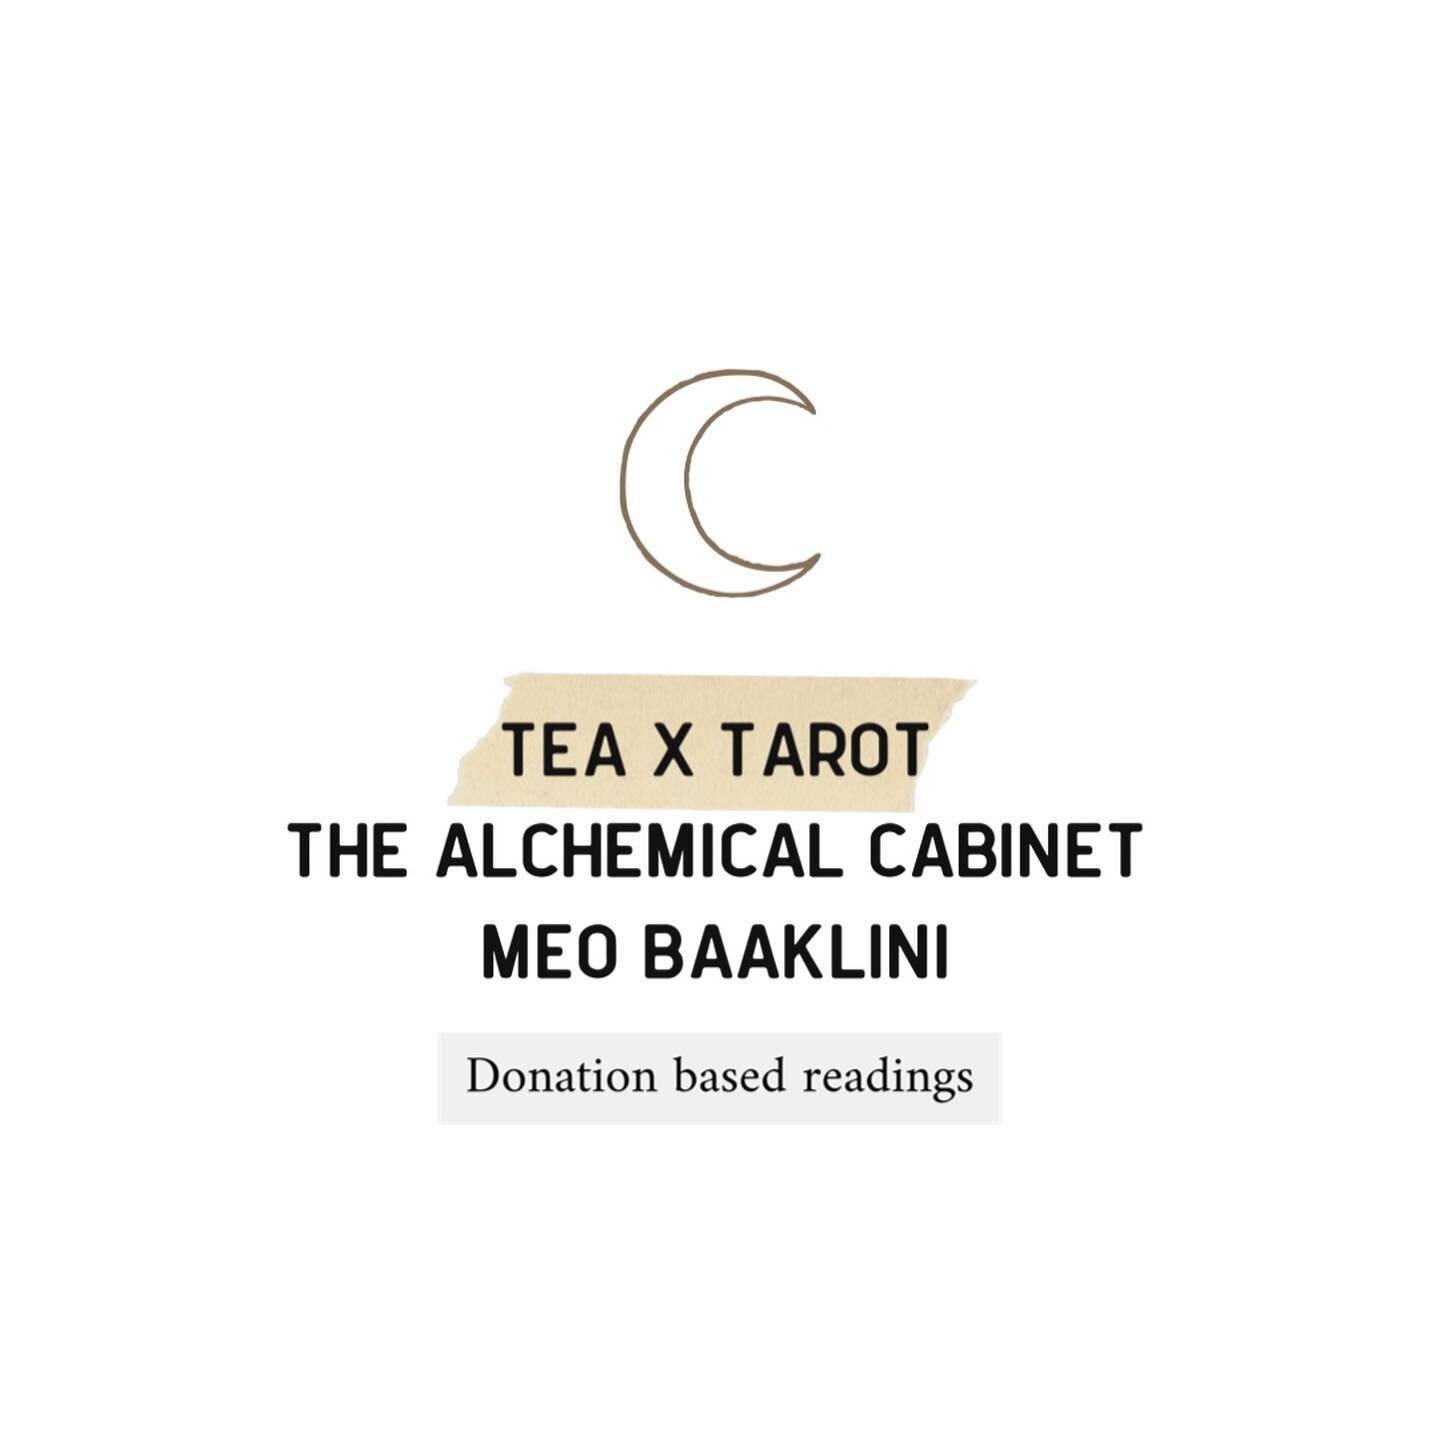 Tonight is the night (in my Betty Wright voice) Tea x Tarot at the @thealchemicalcabinet at #containerpark. I&rsquo;ll be there from 5-8pm, but don&rsquo;t worry if you can&rsquo;t make it! We will be going live and pulling cards, so send your donati